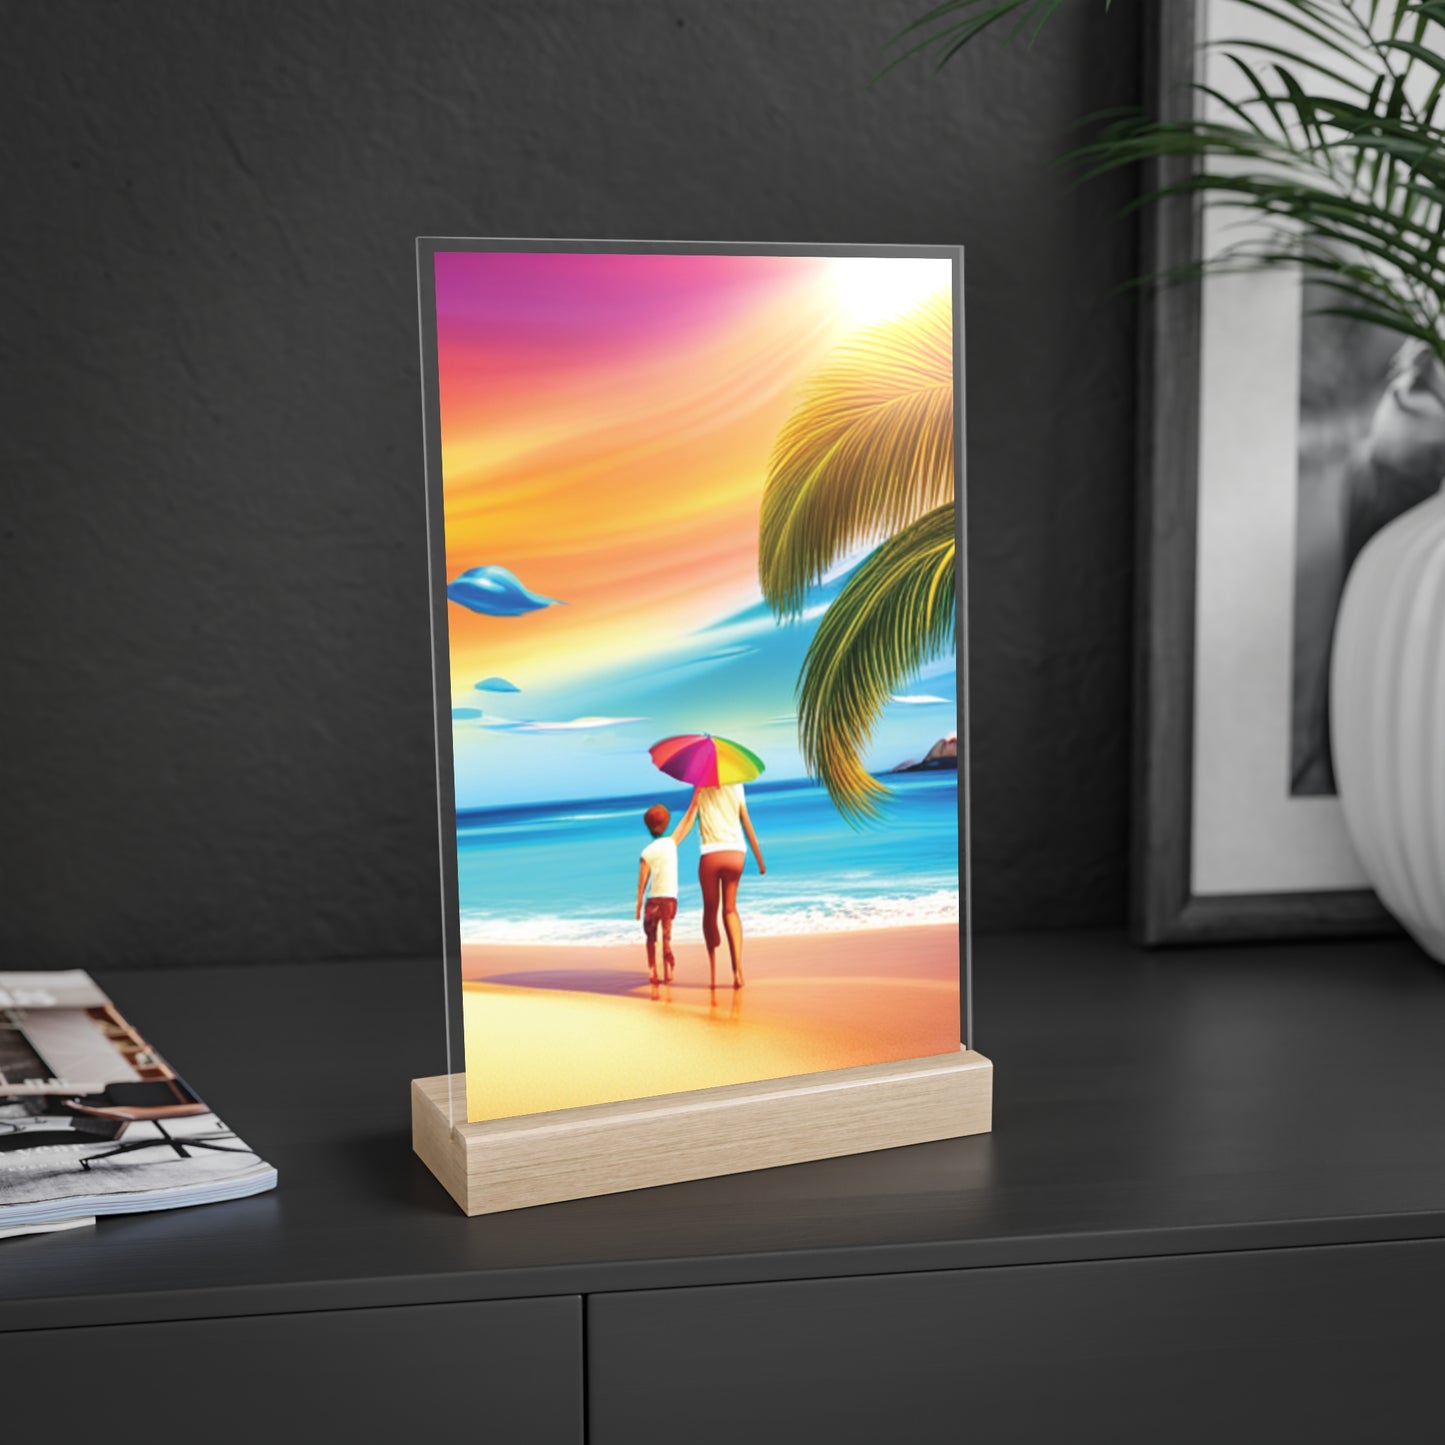 Acrylic Sign with Wooden Stand [Beach]